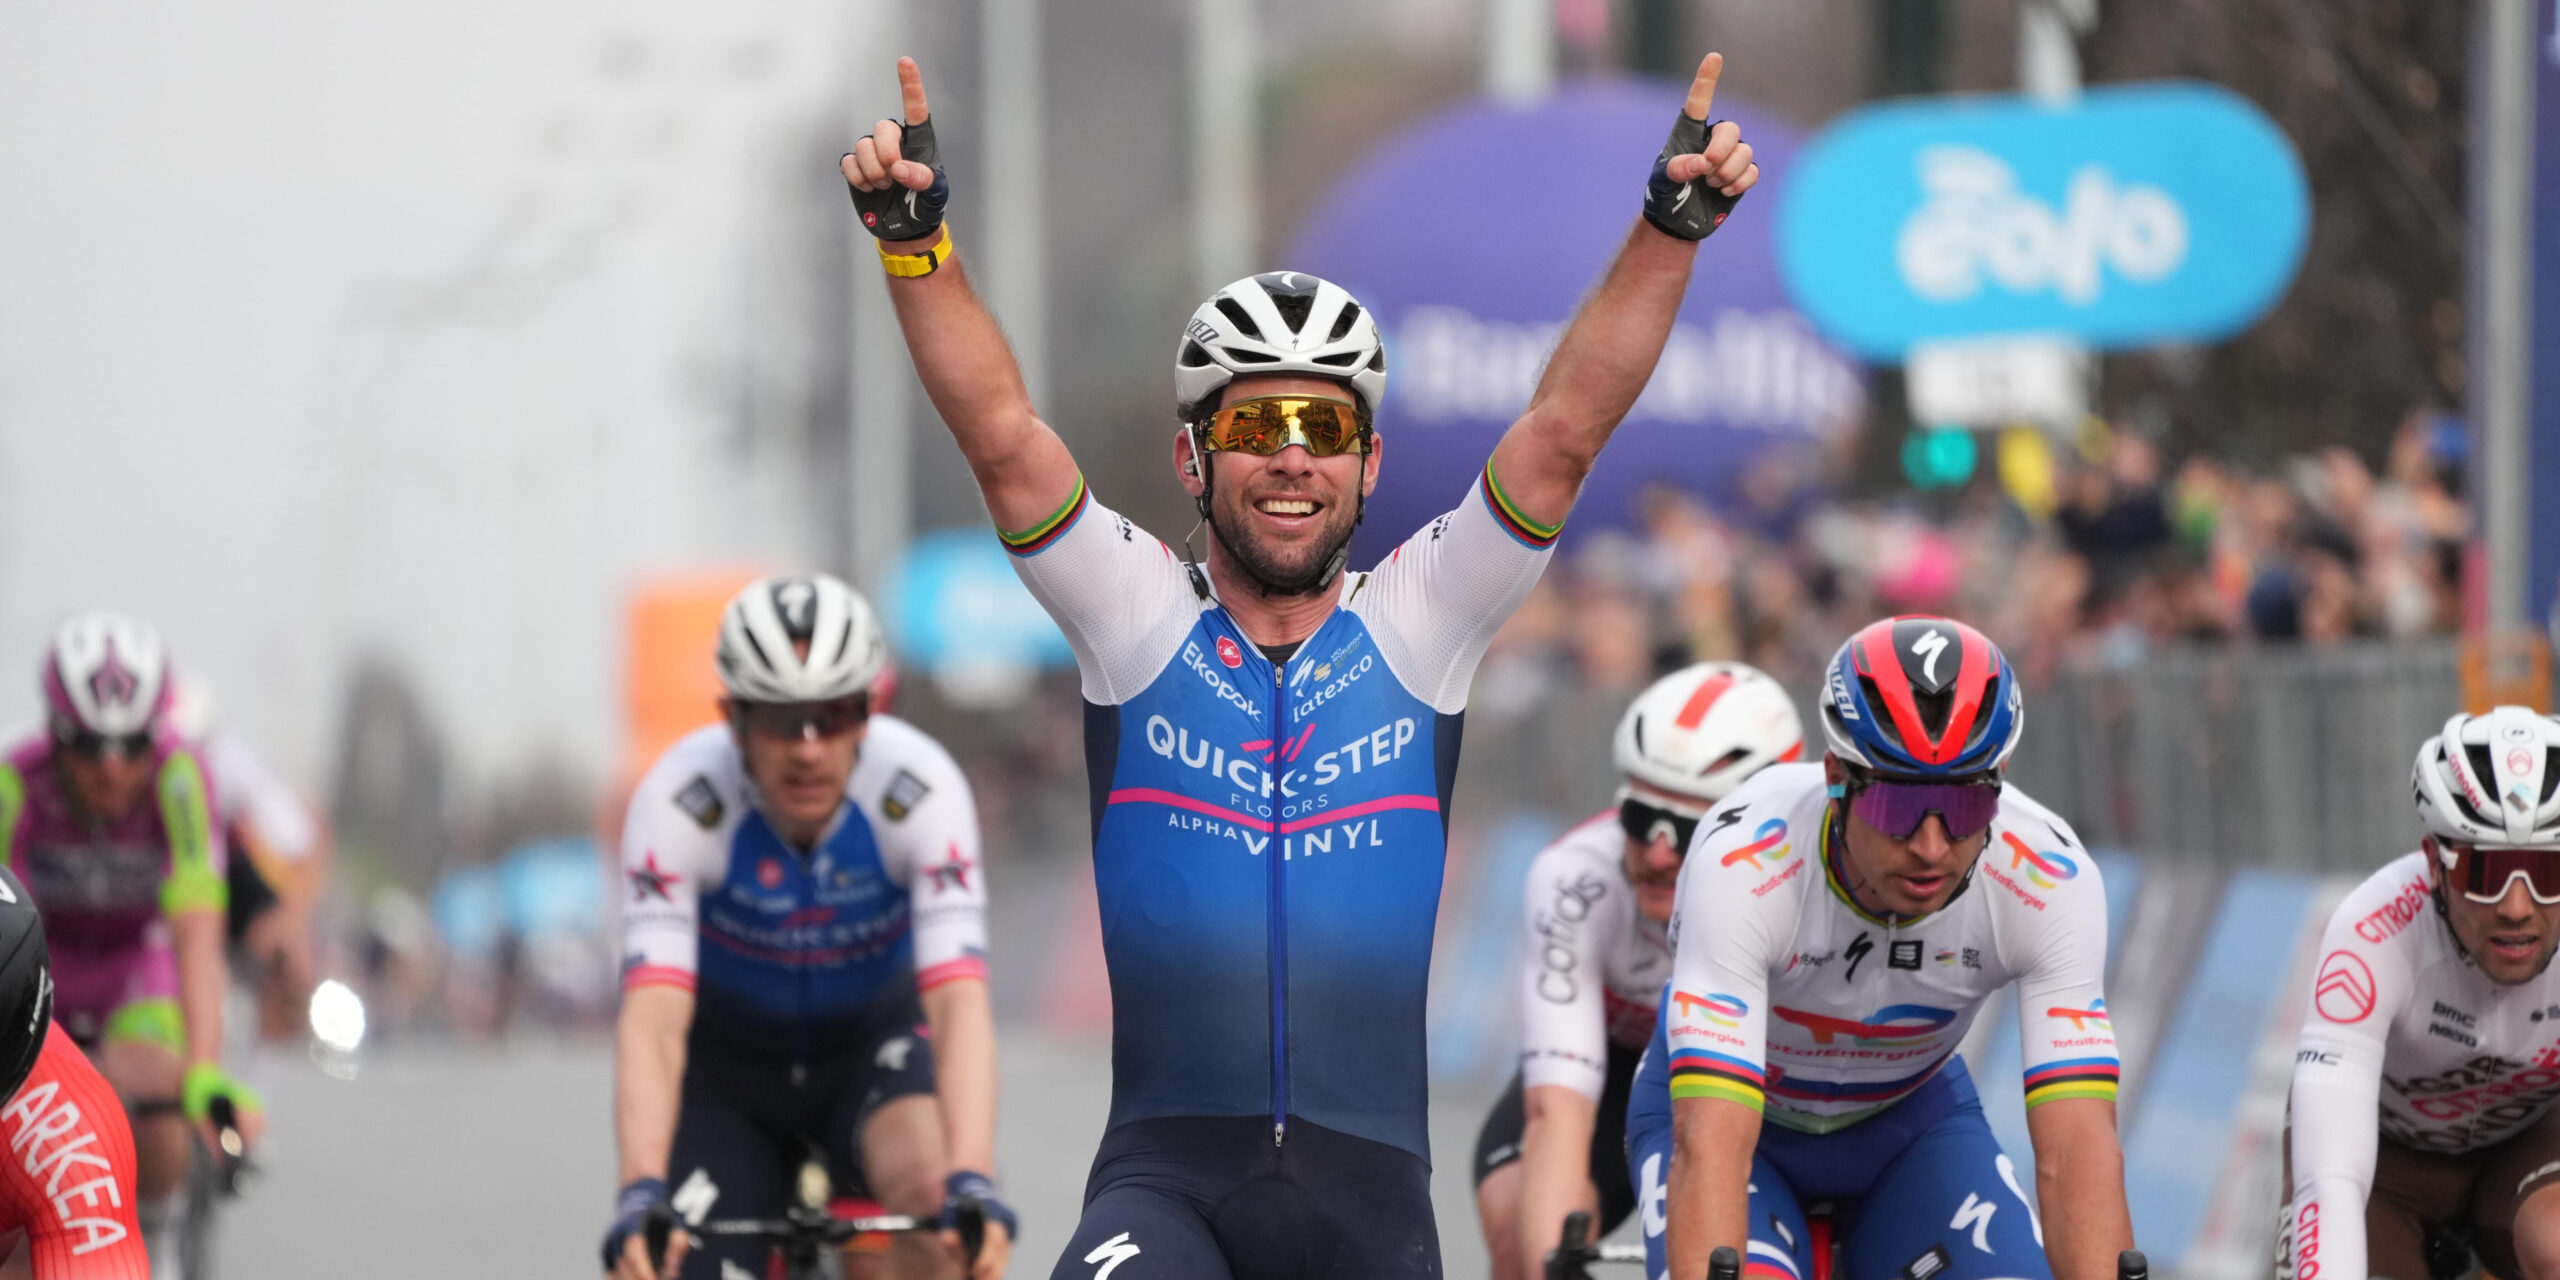 Mark Cavendish wins the 2022 Milano-Torino presented by EOLO